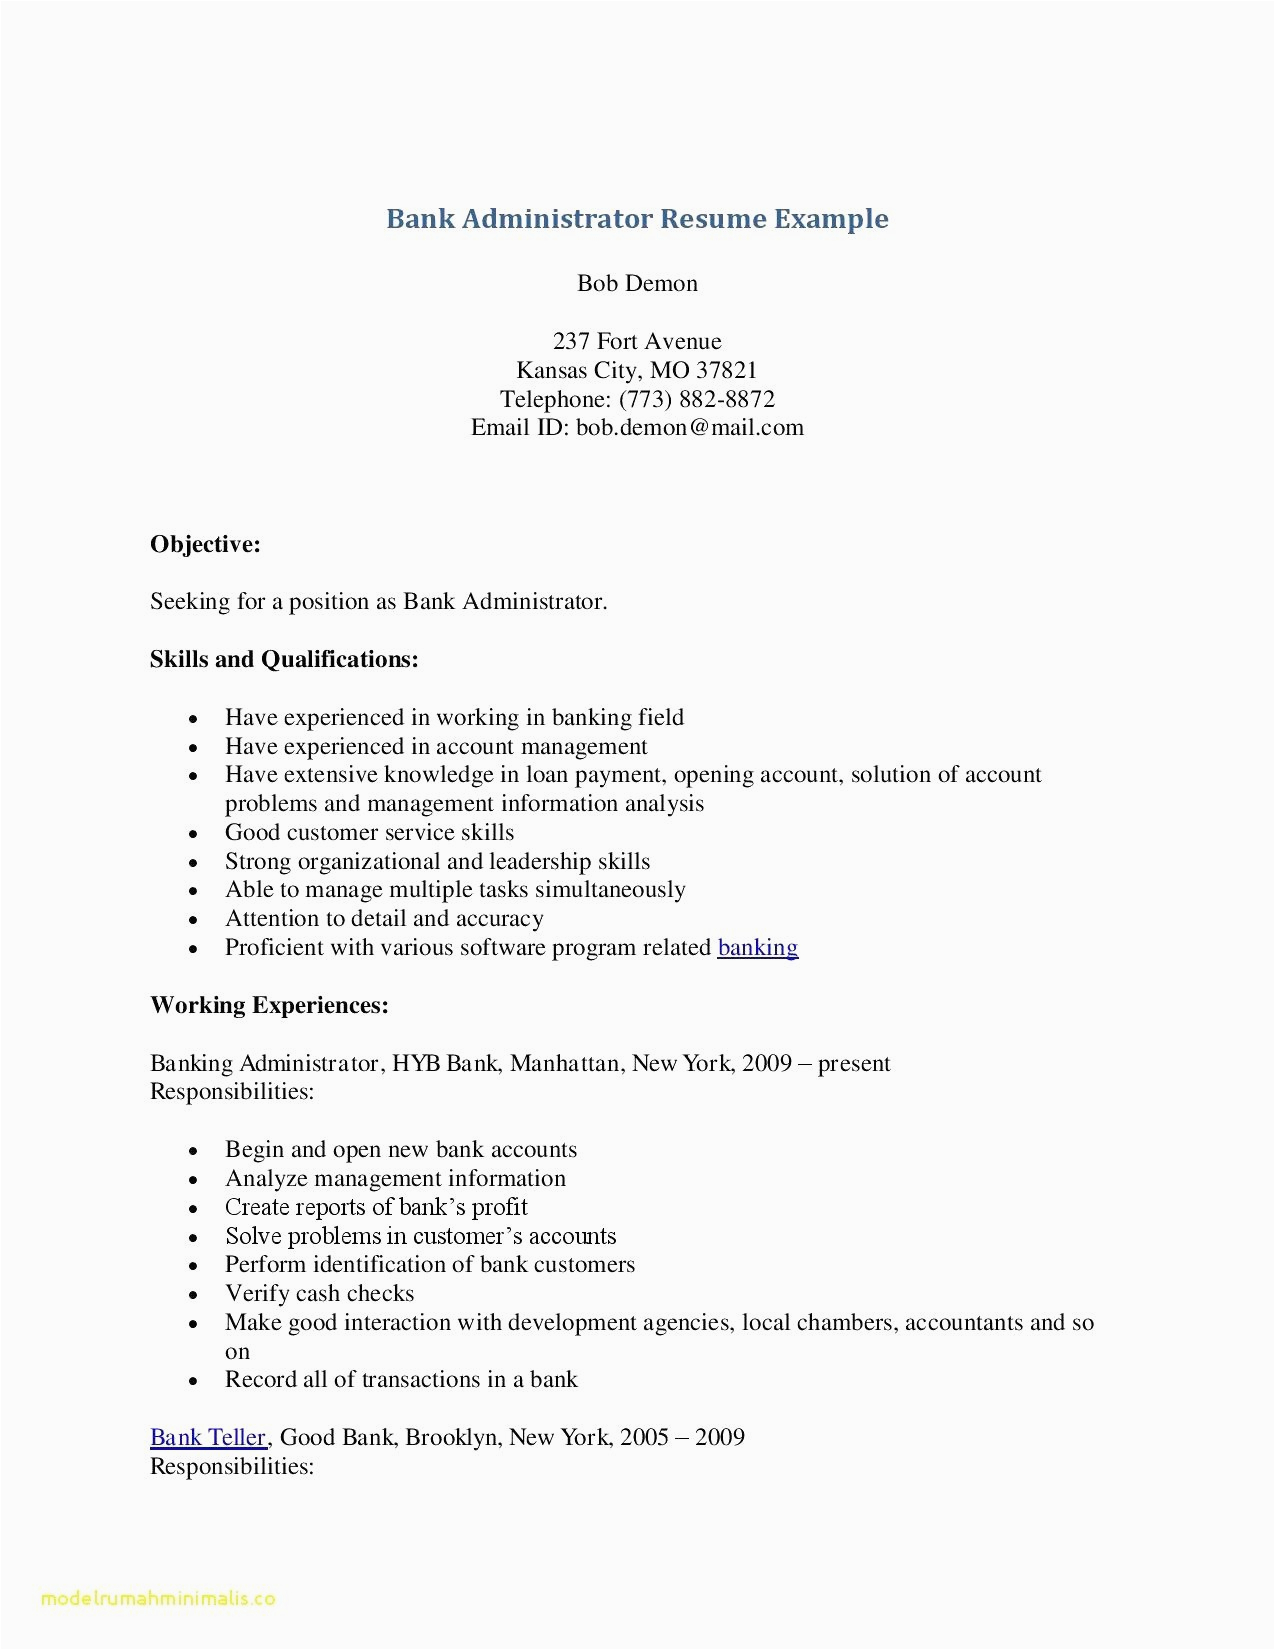 Sample Resume for Flight attendant with No Experience Flight attendant Resume No Experience Mryn ism